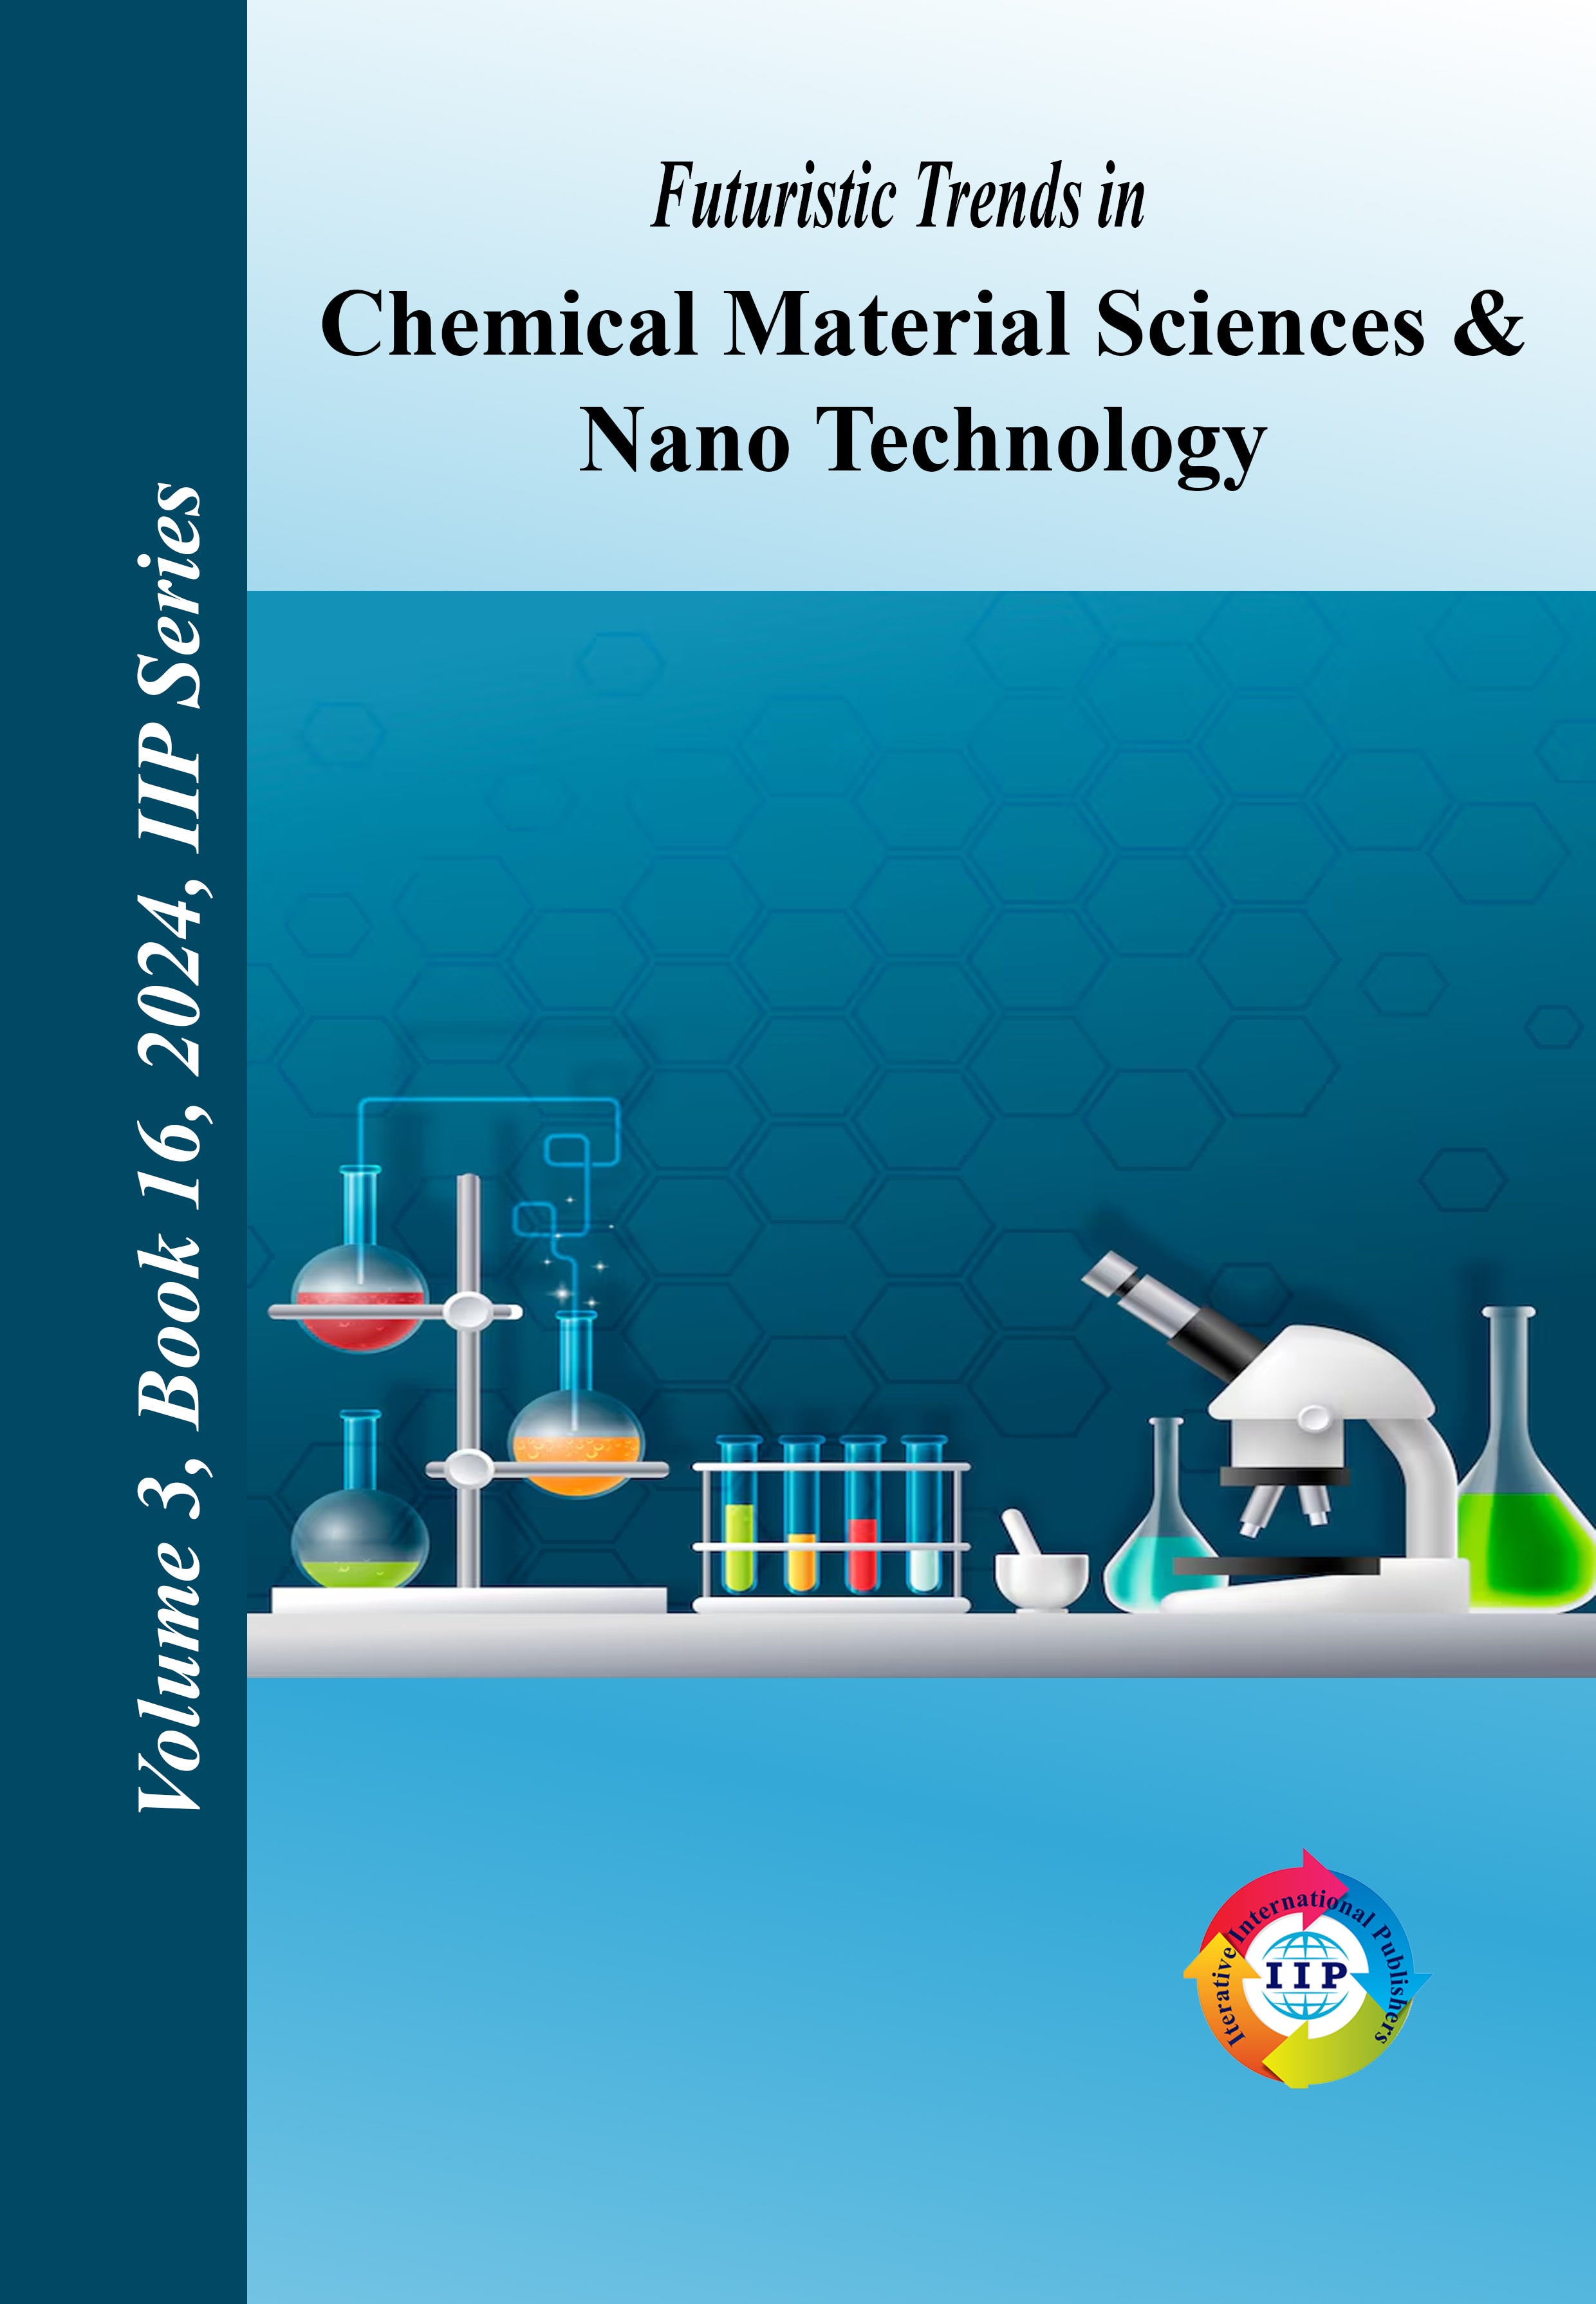 Futuristic Trends in Chemical Material Sciences & Nano Technology Volume 3 Book 16